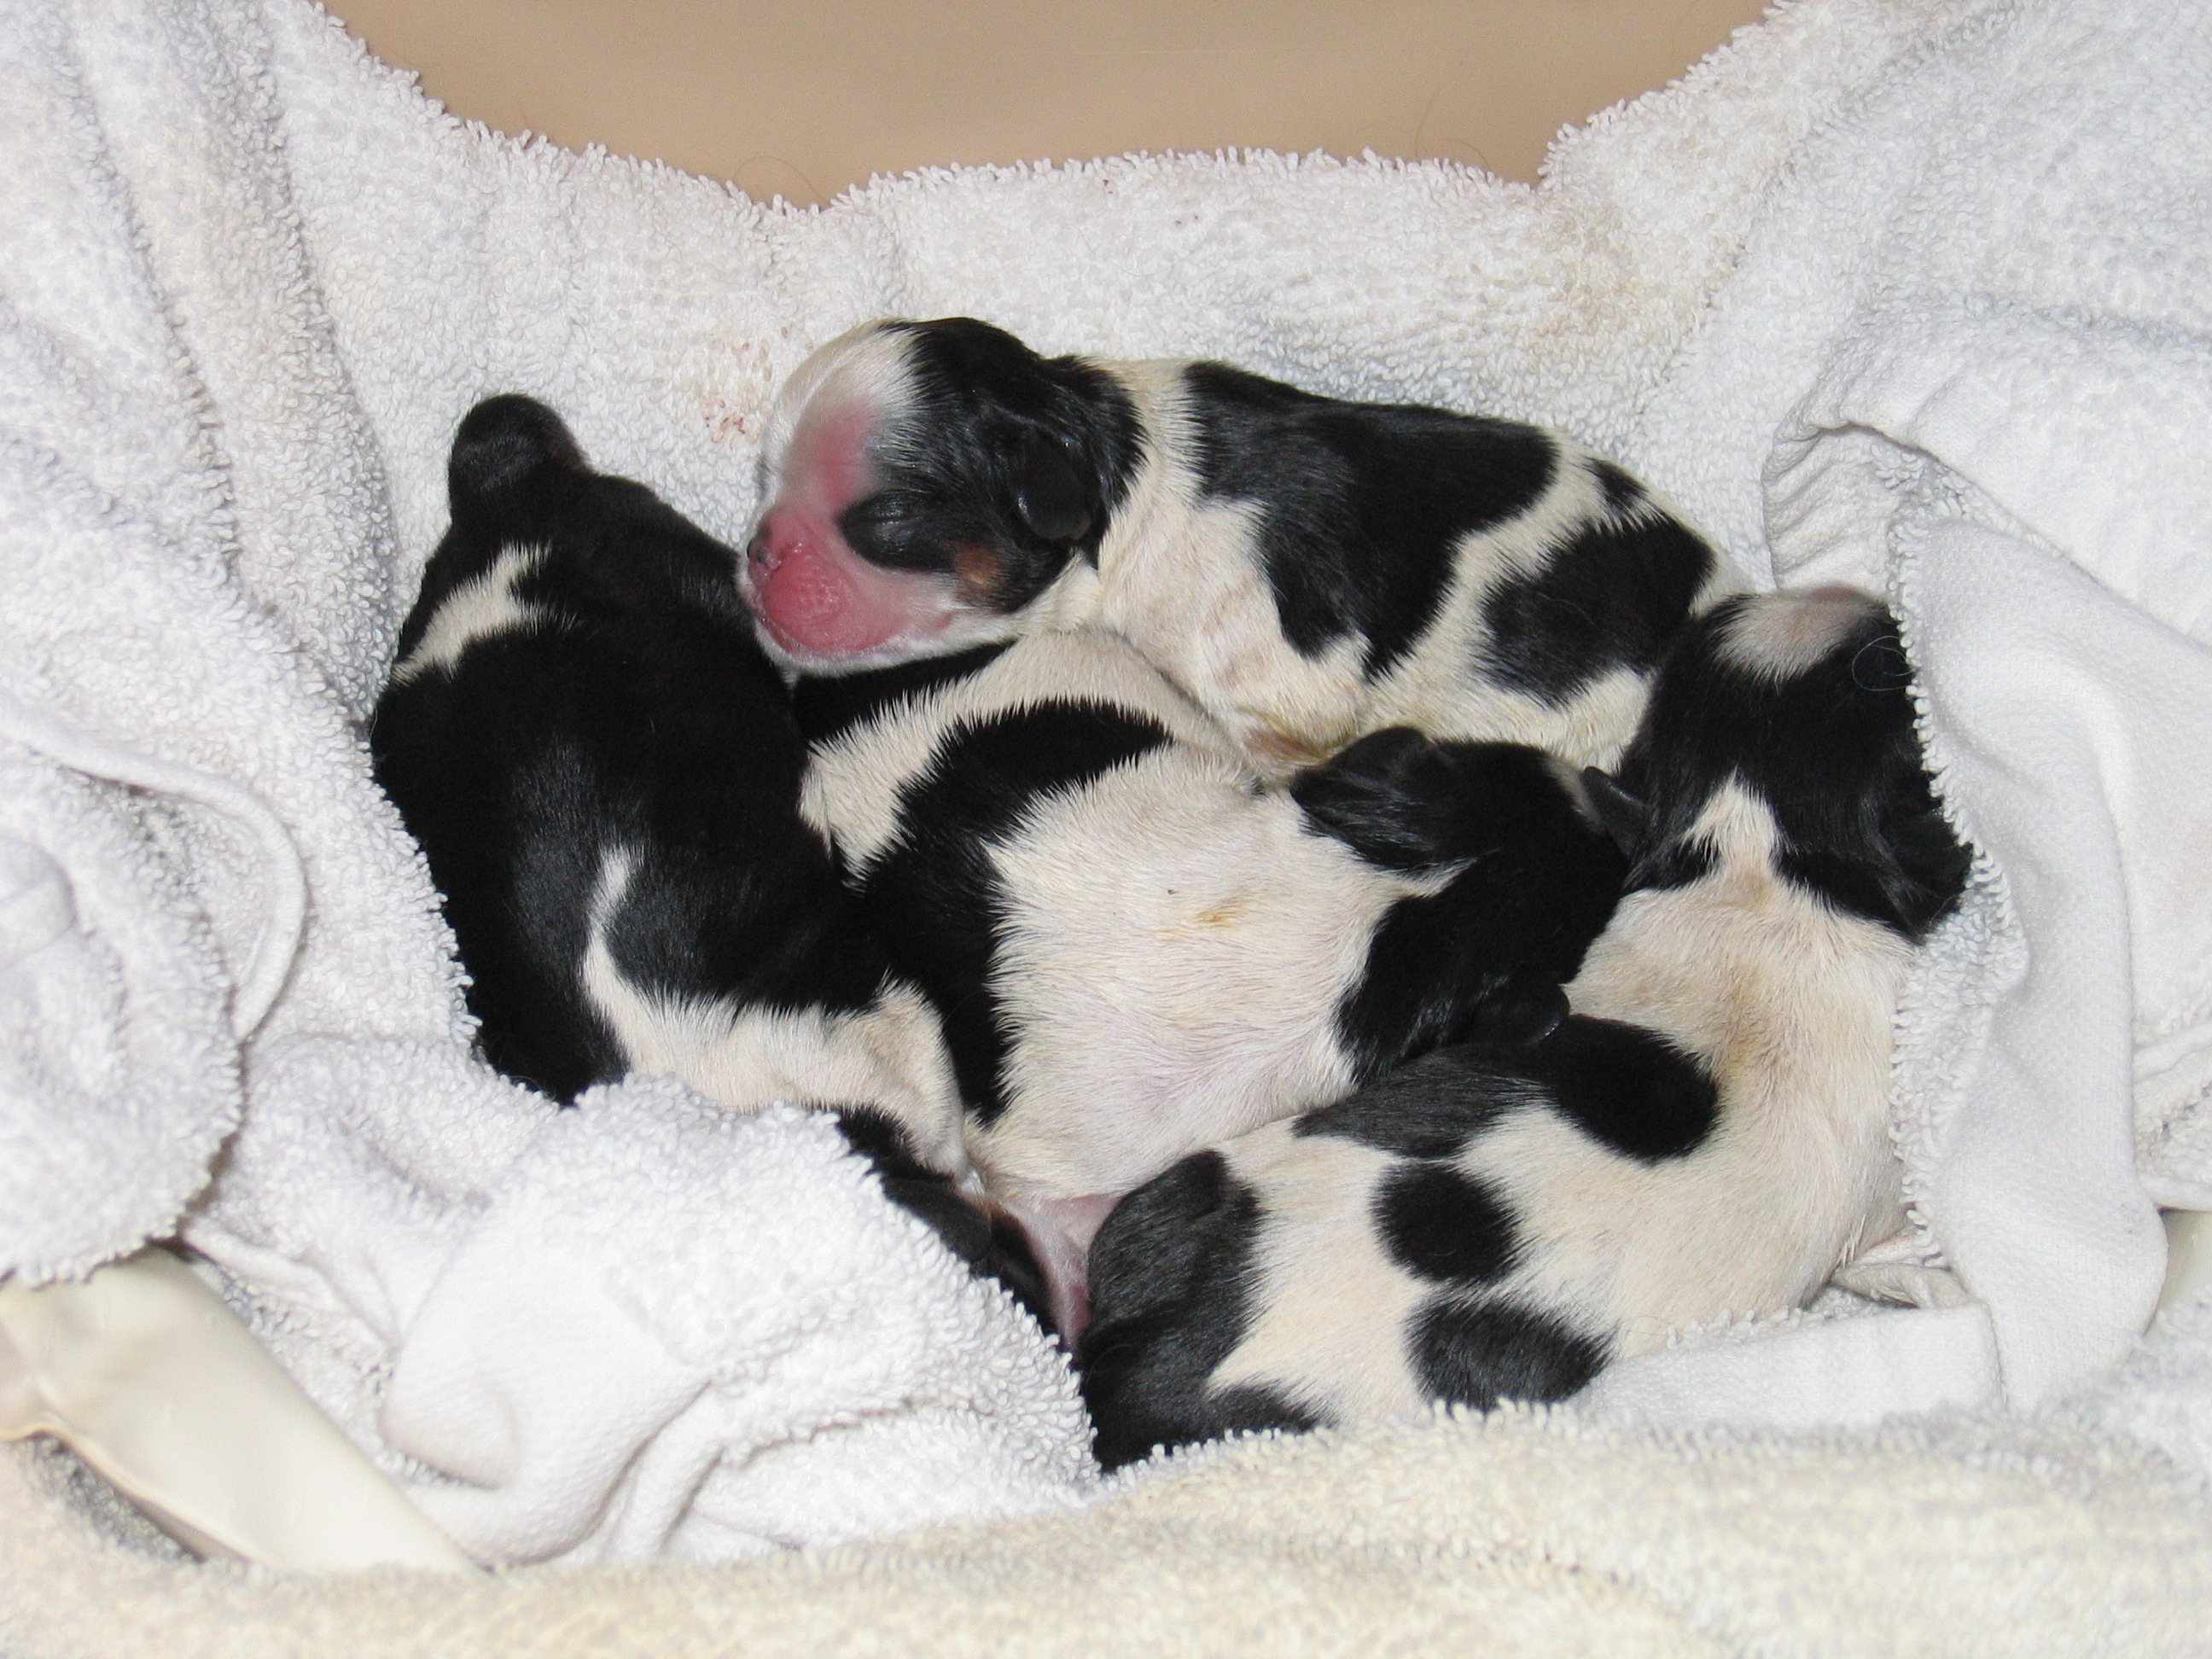 Puppies just after being born 9-27-08